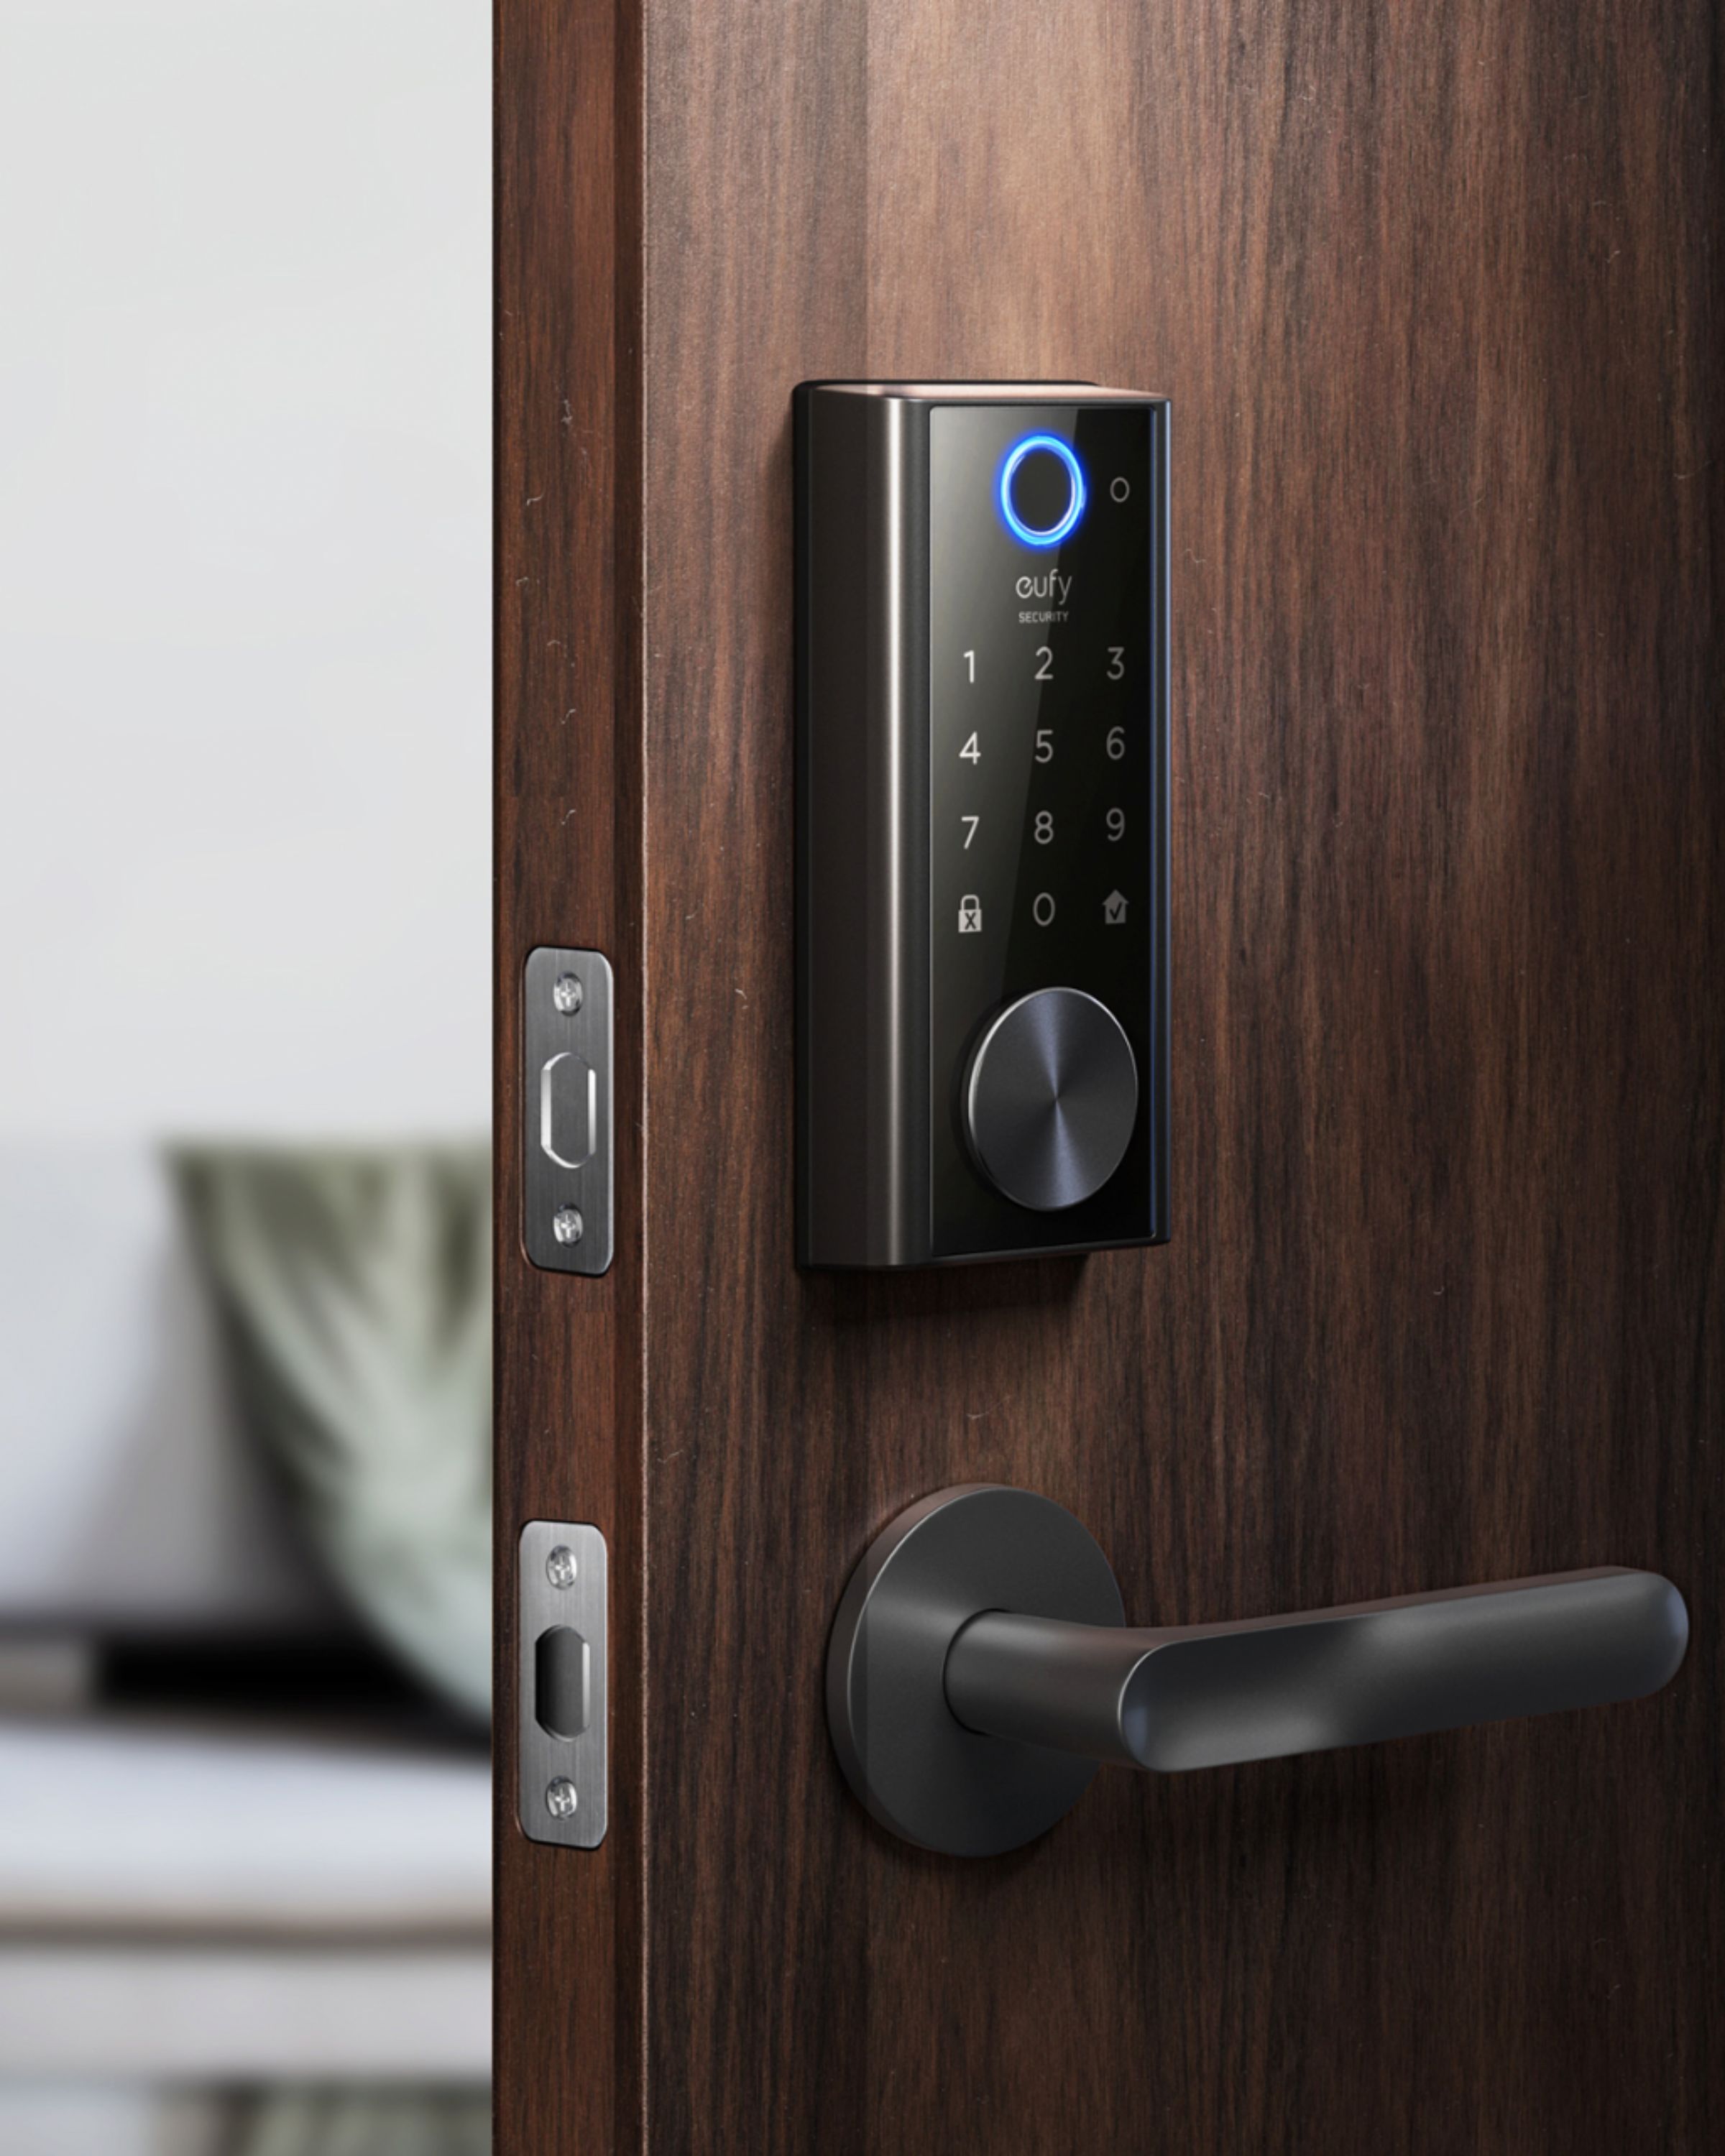 embargo Hold Self-indulgence eufy Security Smart Lock Touch & Wi-Fi Black T8520J11 - Best Buy